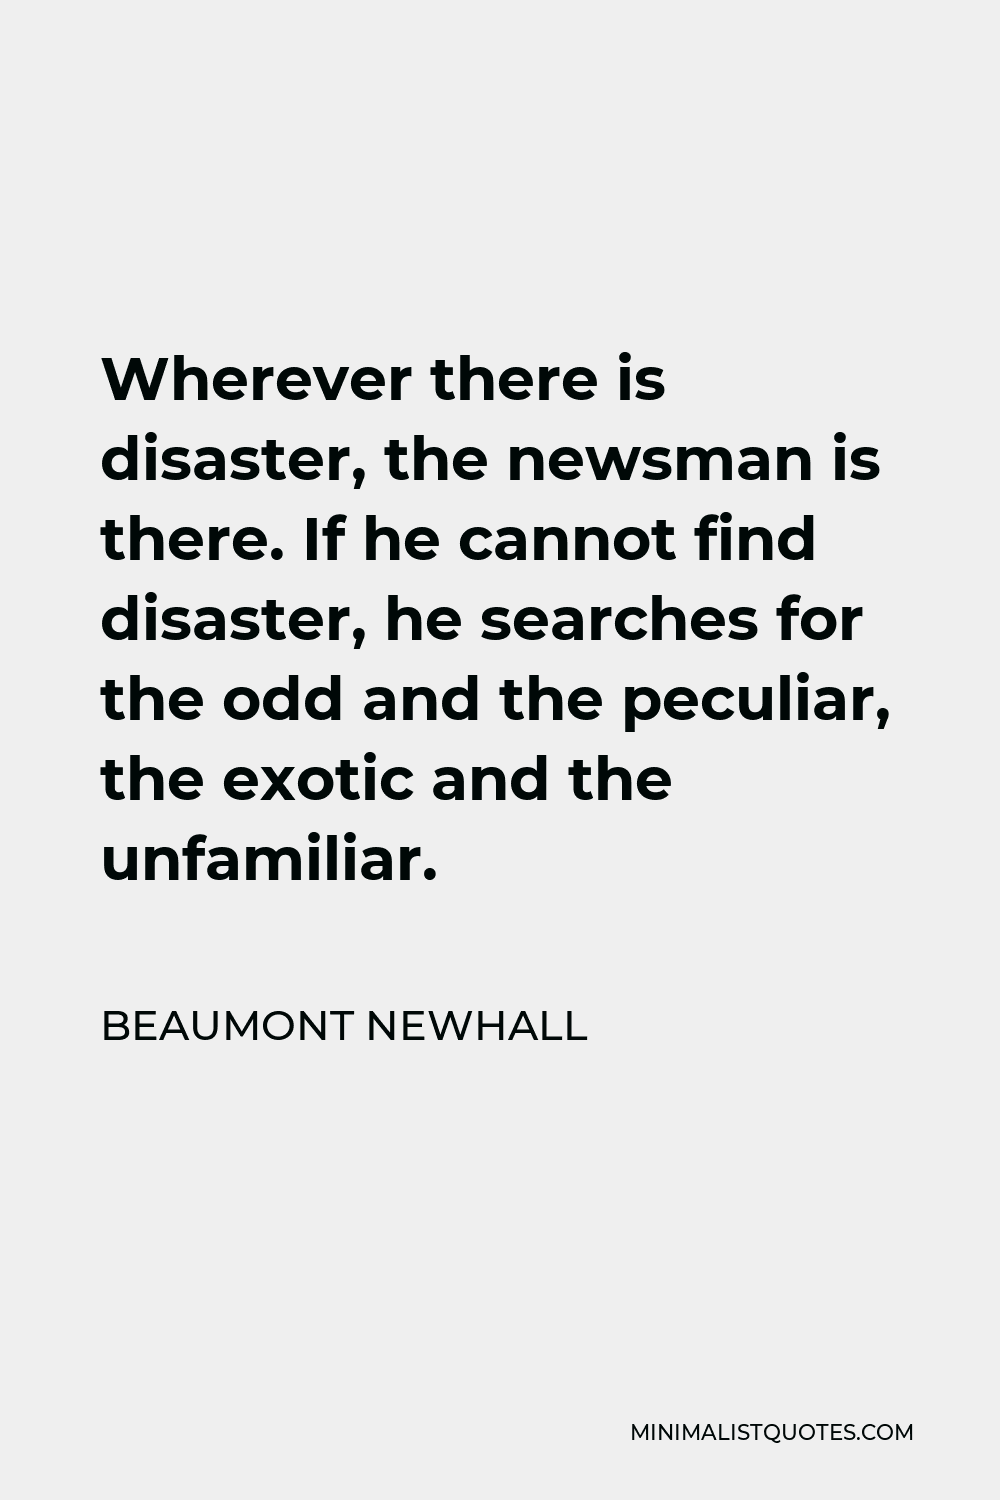 Beaumont Newhall Quote - Wherever there is disaster, the newsman is there. If he cannot find disaster, he searches for the odd and the peculiar, the exotic and the unfamiliar.